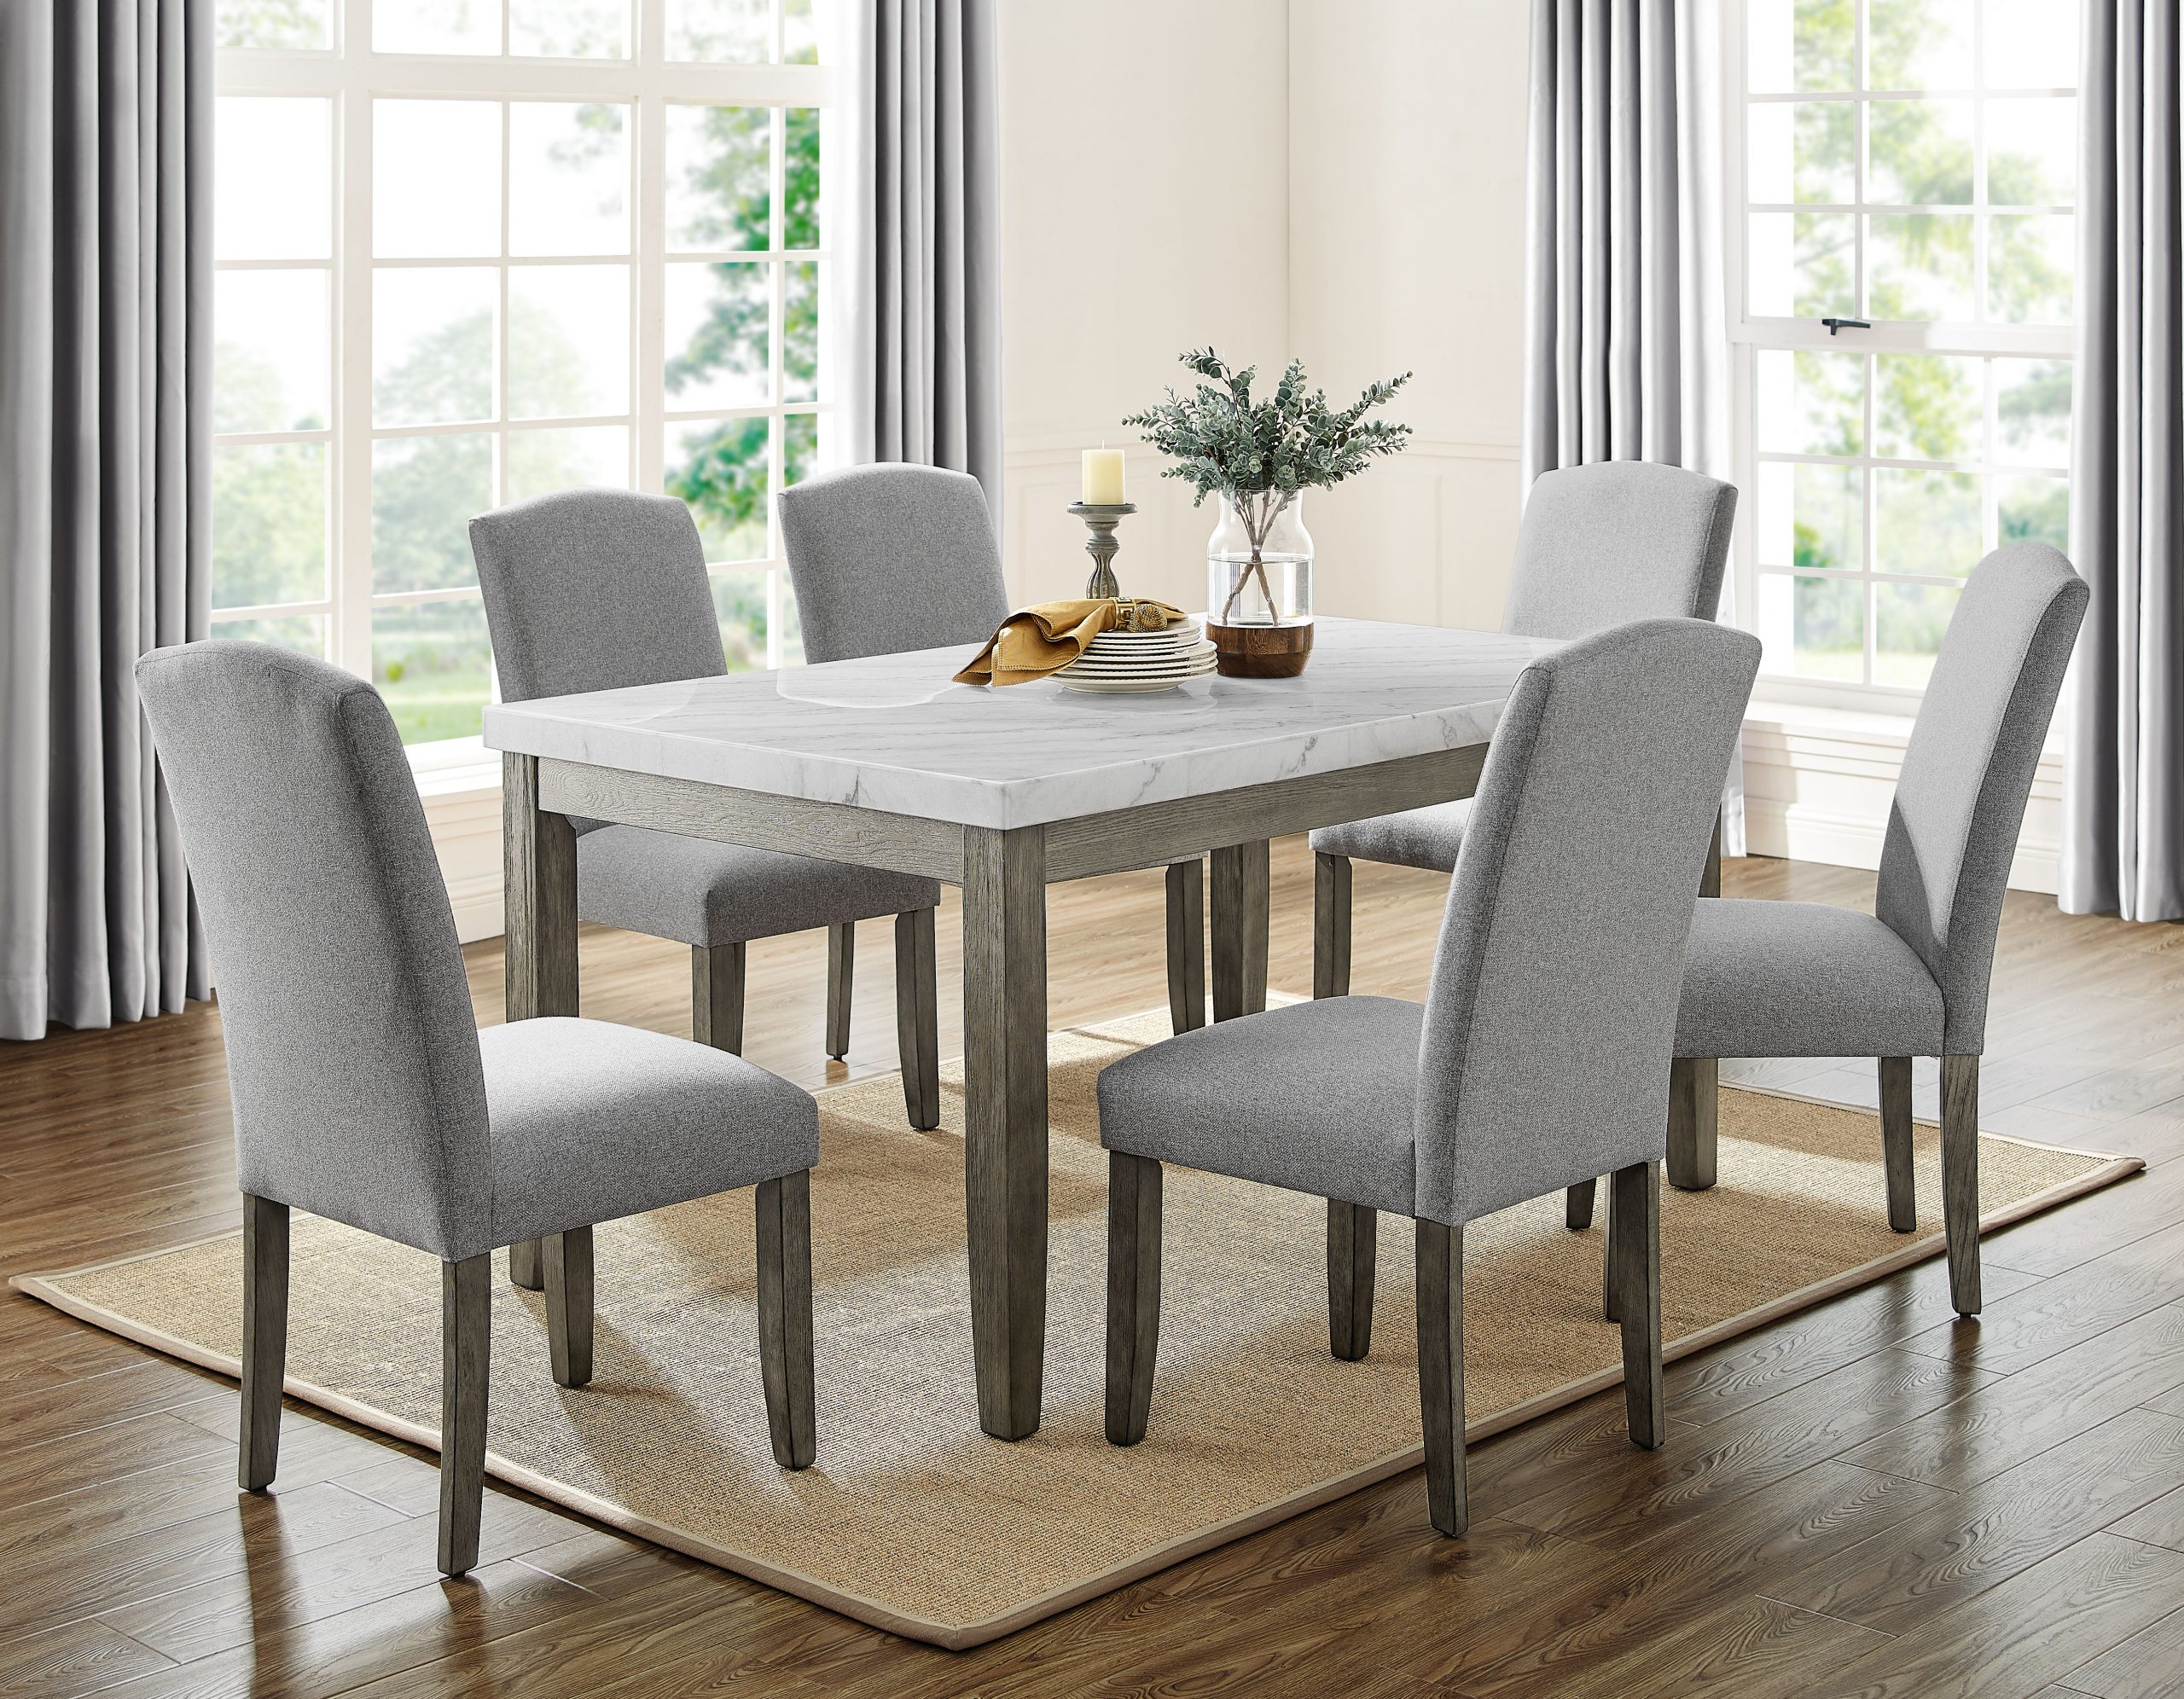 Dining Room Chairs For Marble Table